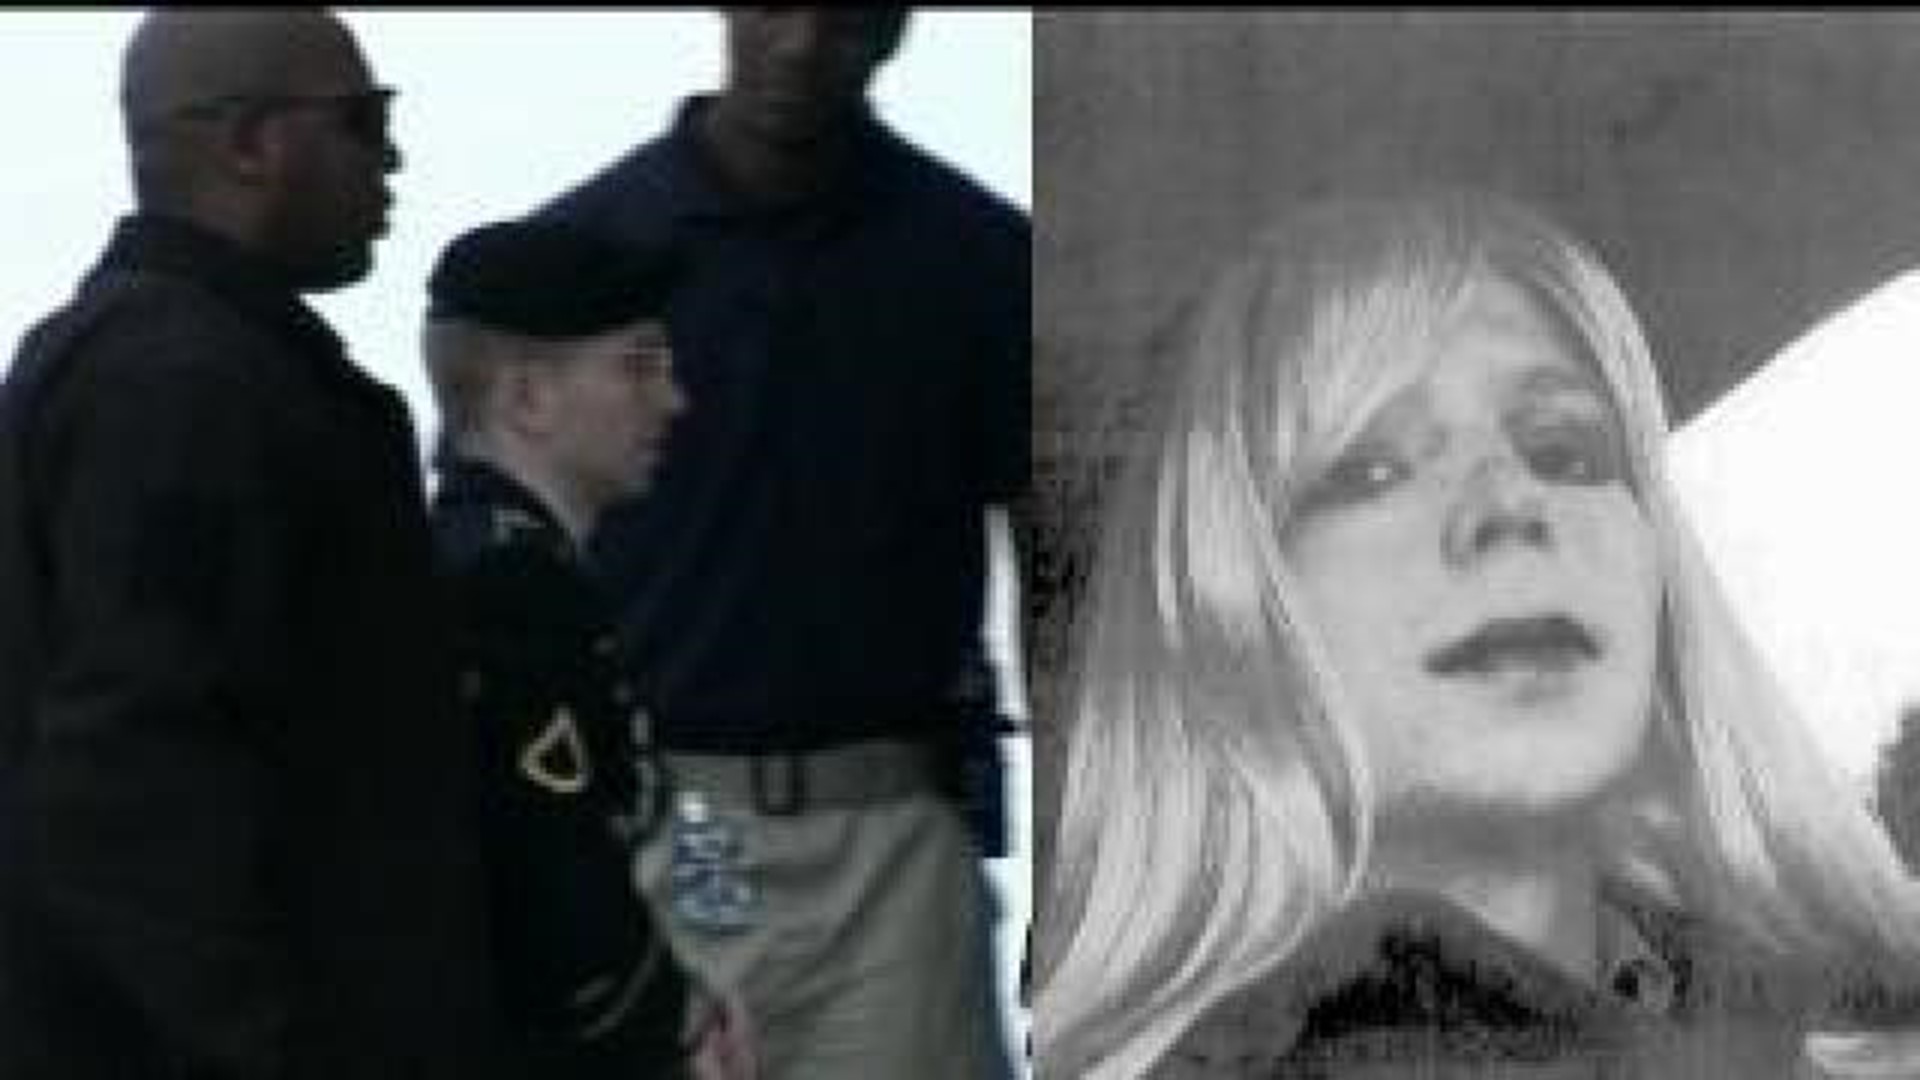 Bradley Manning announces his wishes for hormone therapy